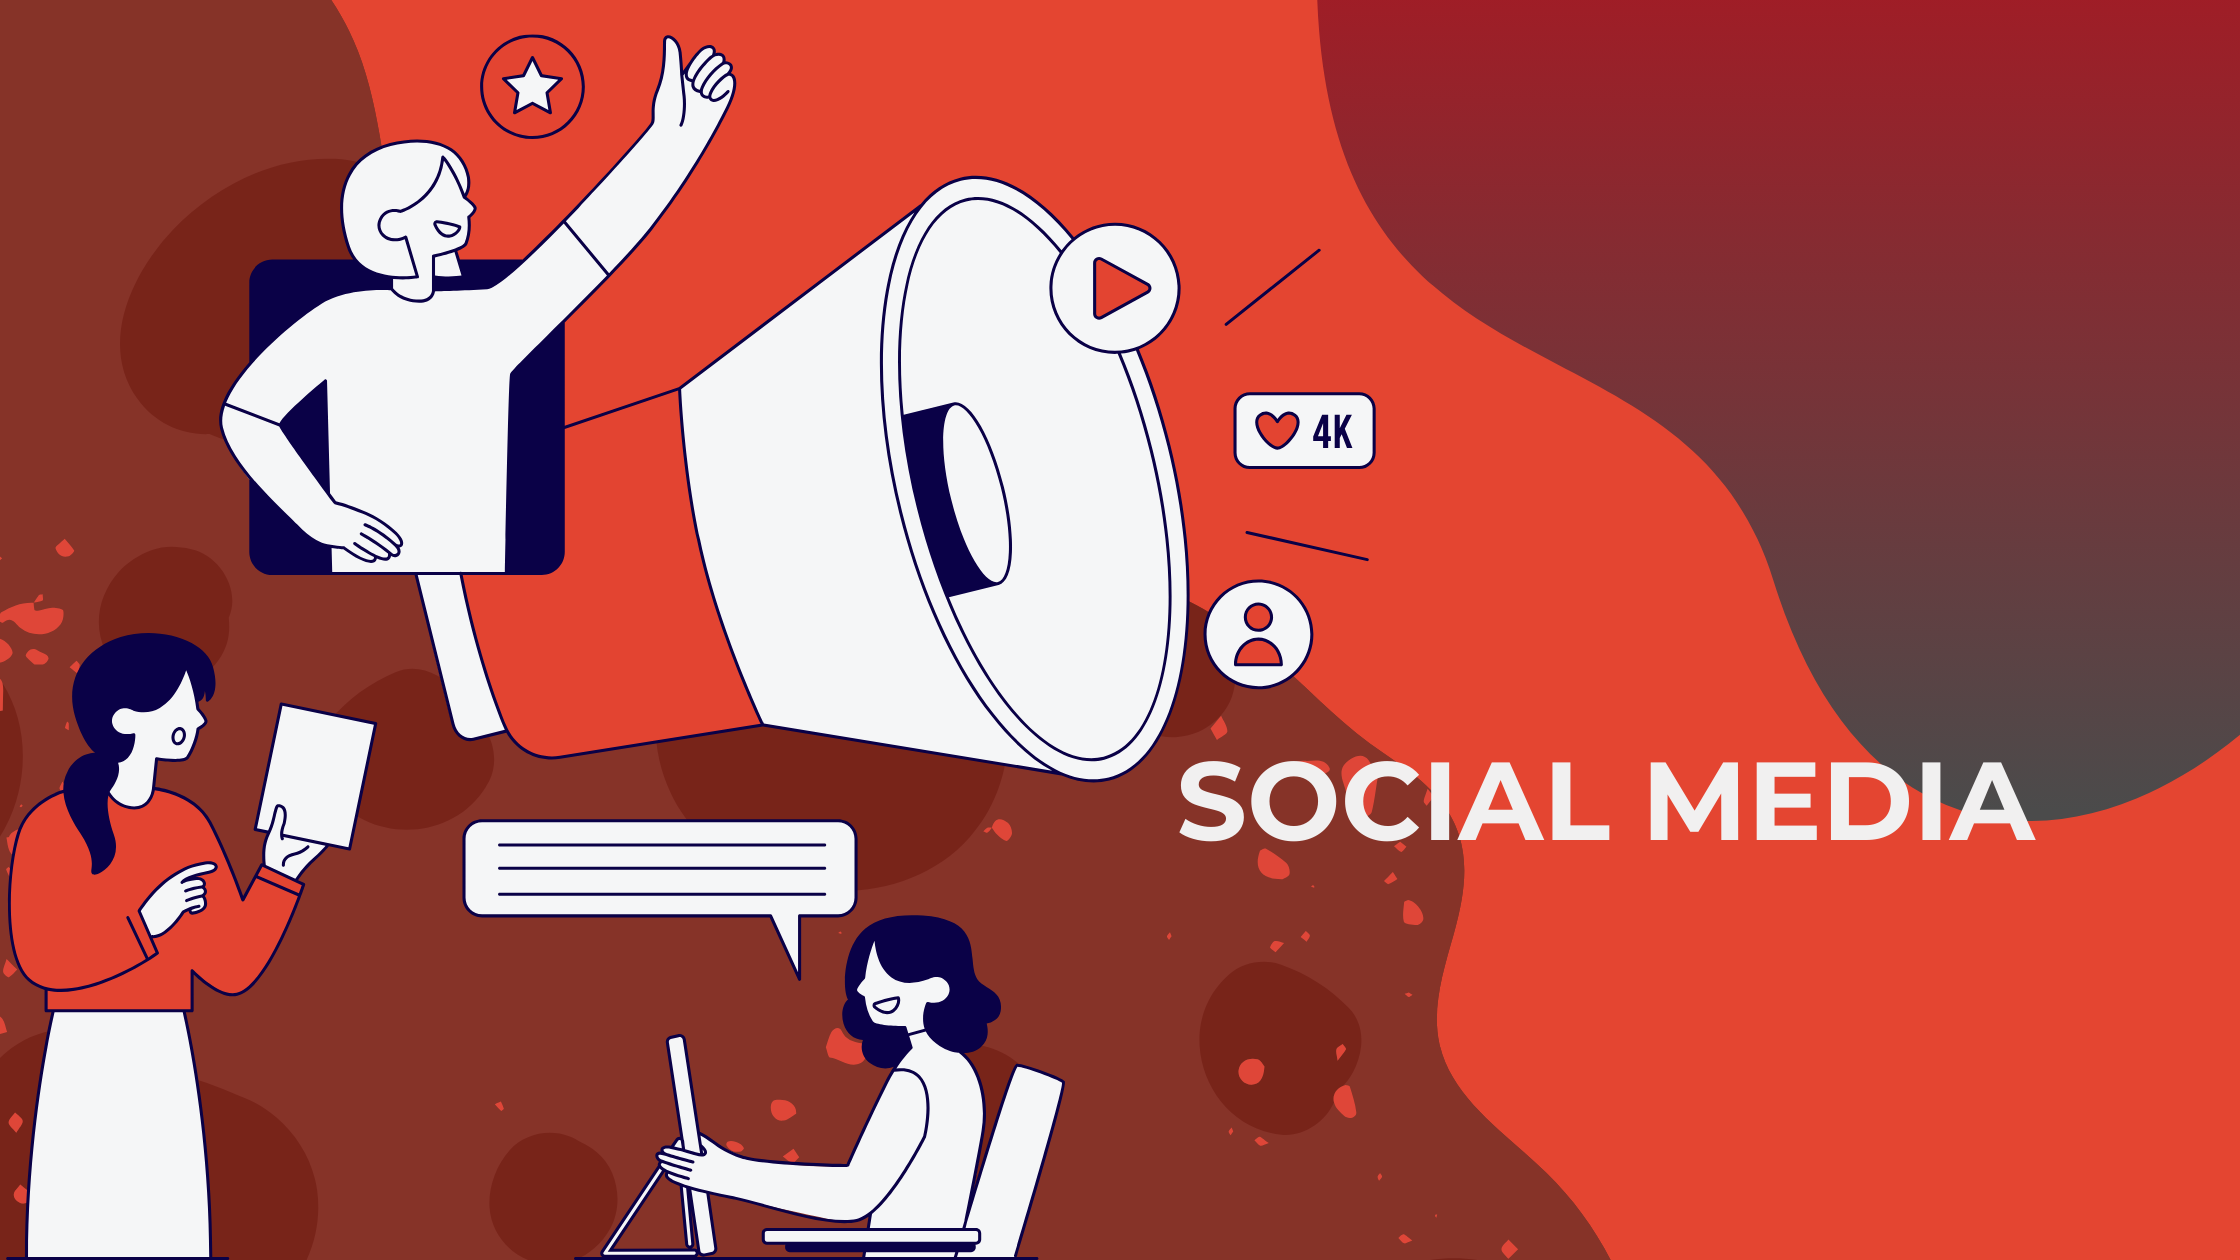 Social Media Management: Key Points for Creating an Effective Social Media Strategy